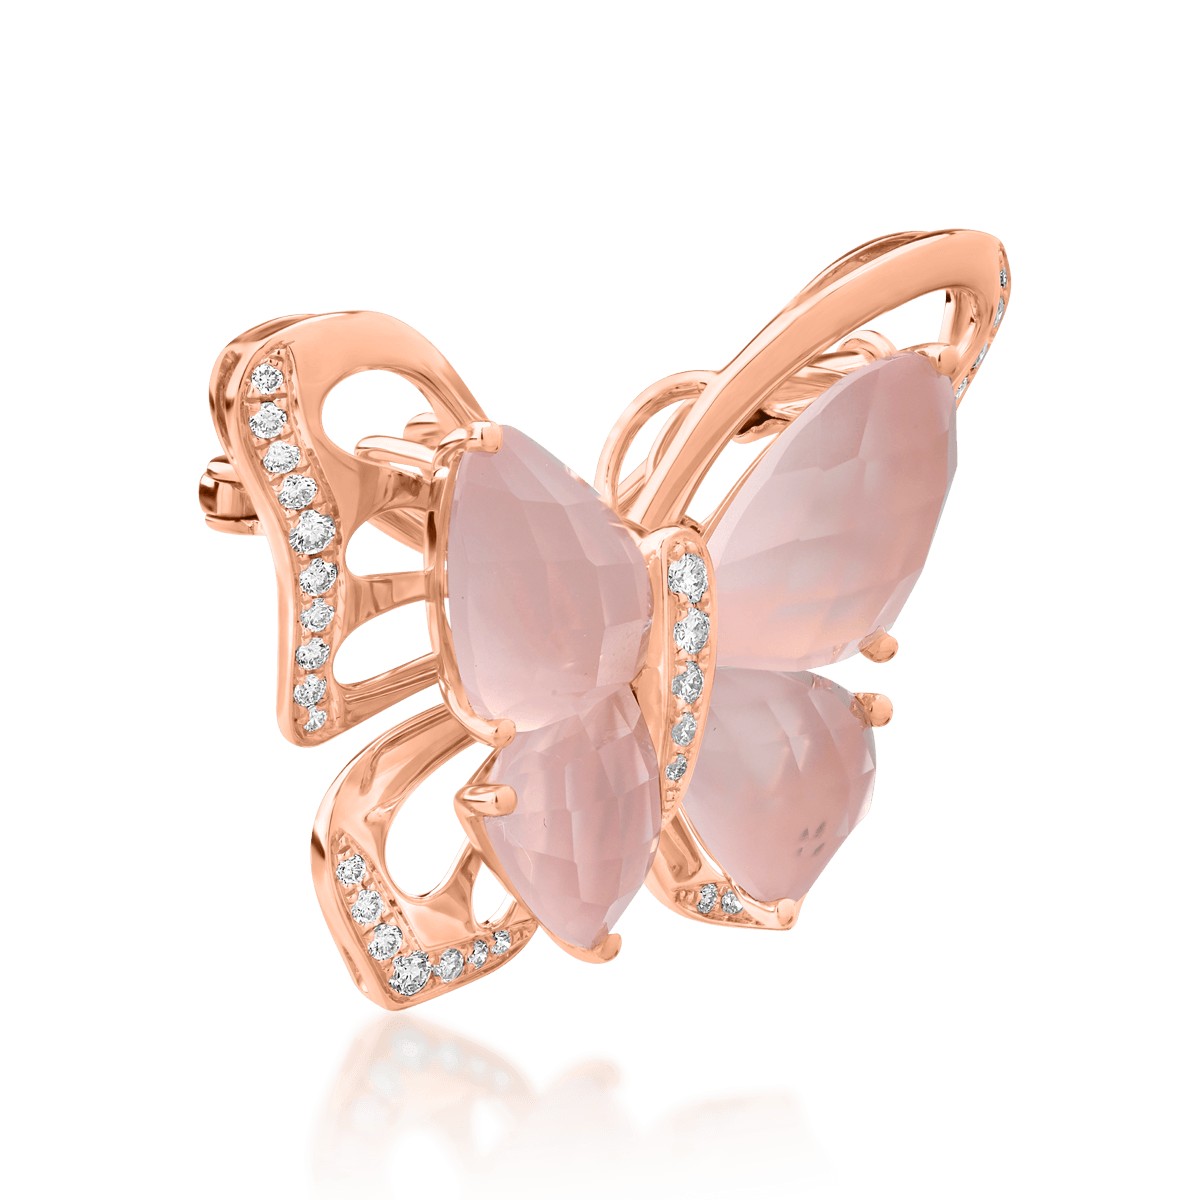 18K rose gold brooch with 11.4ct rose quartz and 0.39ct diamonds